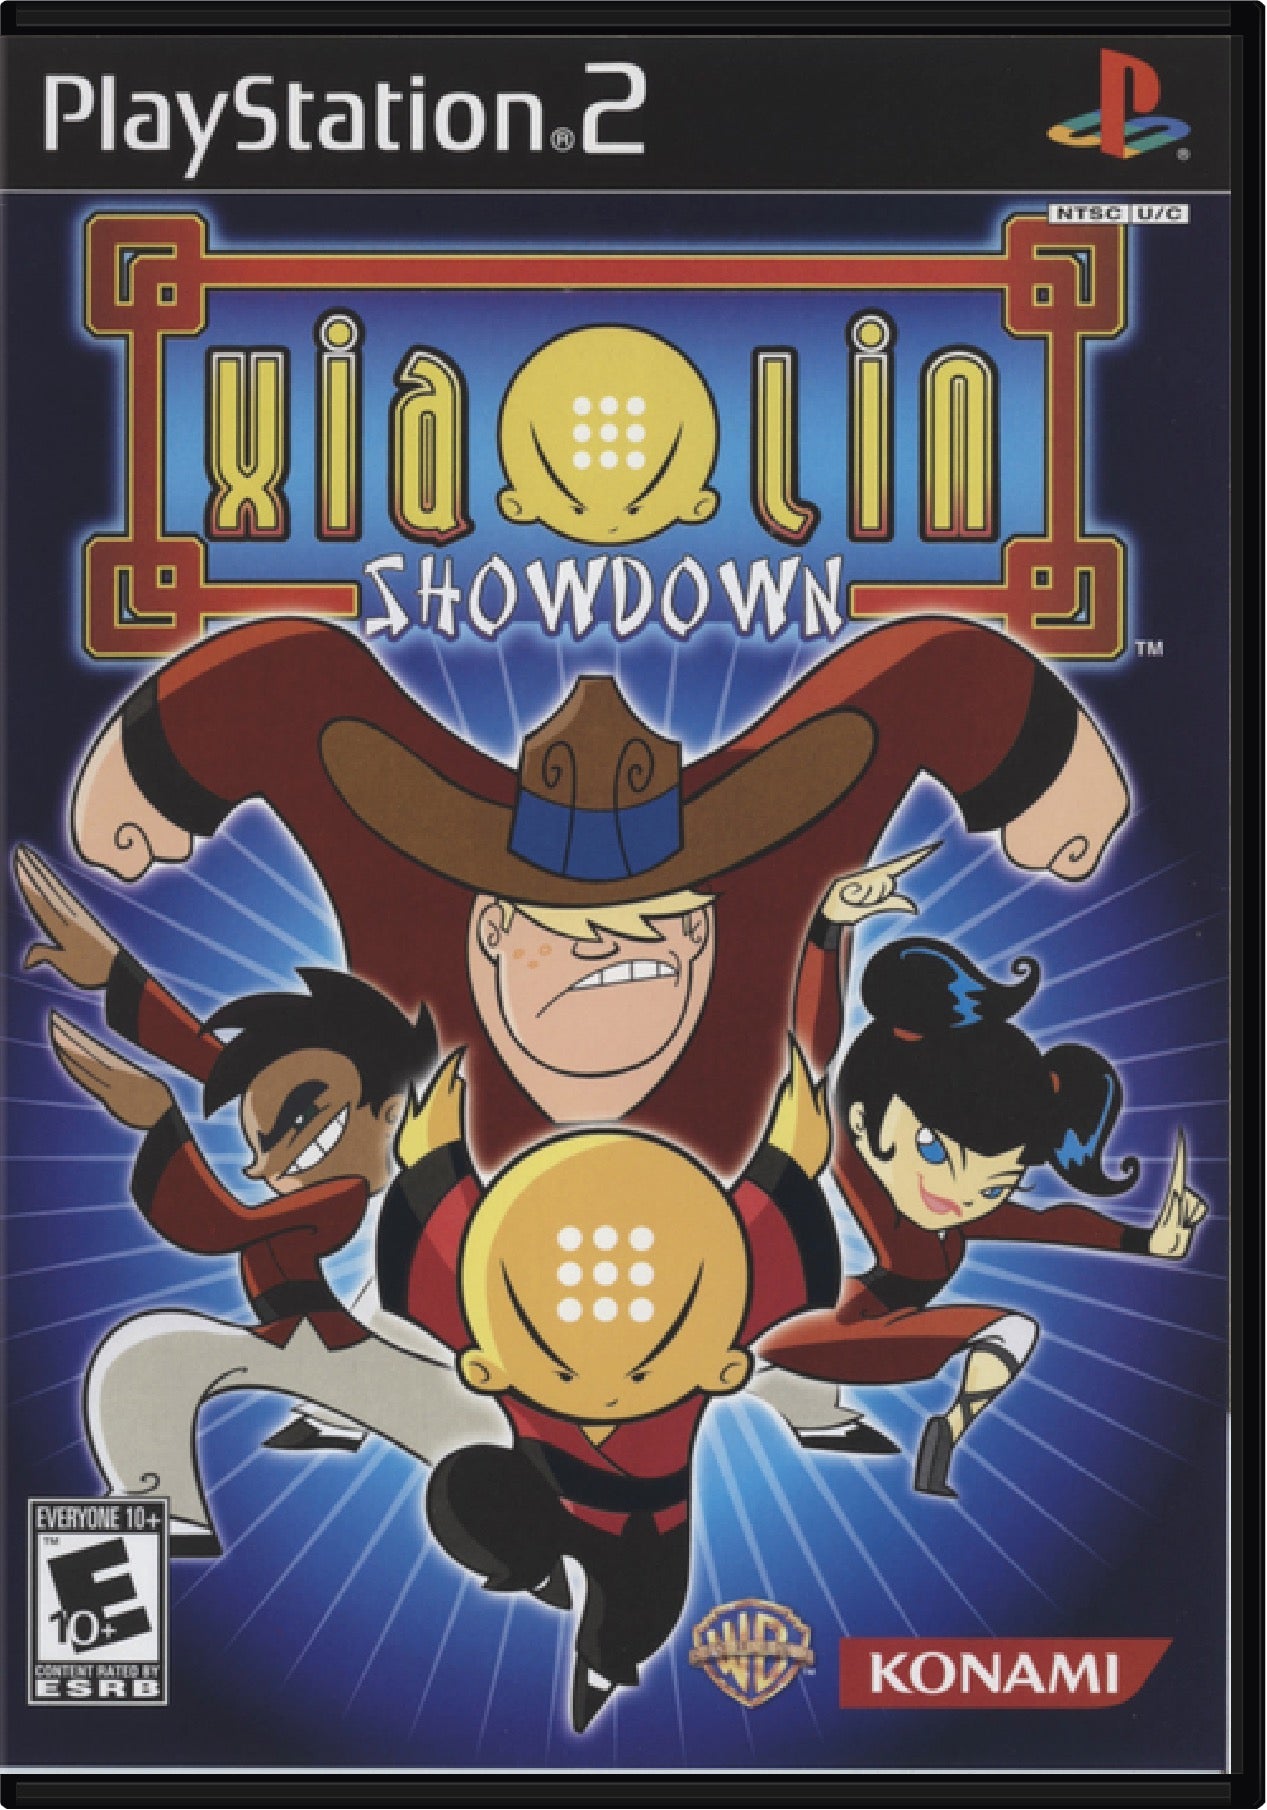 Xiaolin Showdown Cover Art and Product Photo